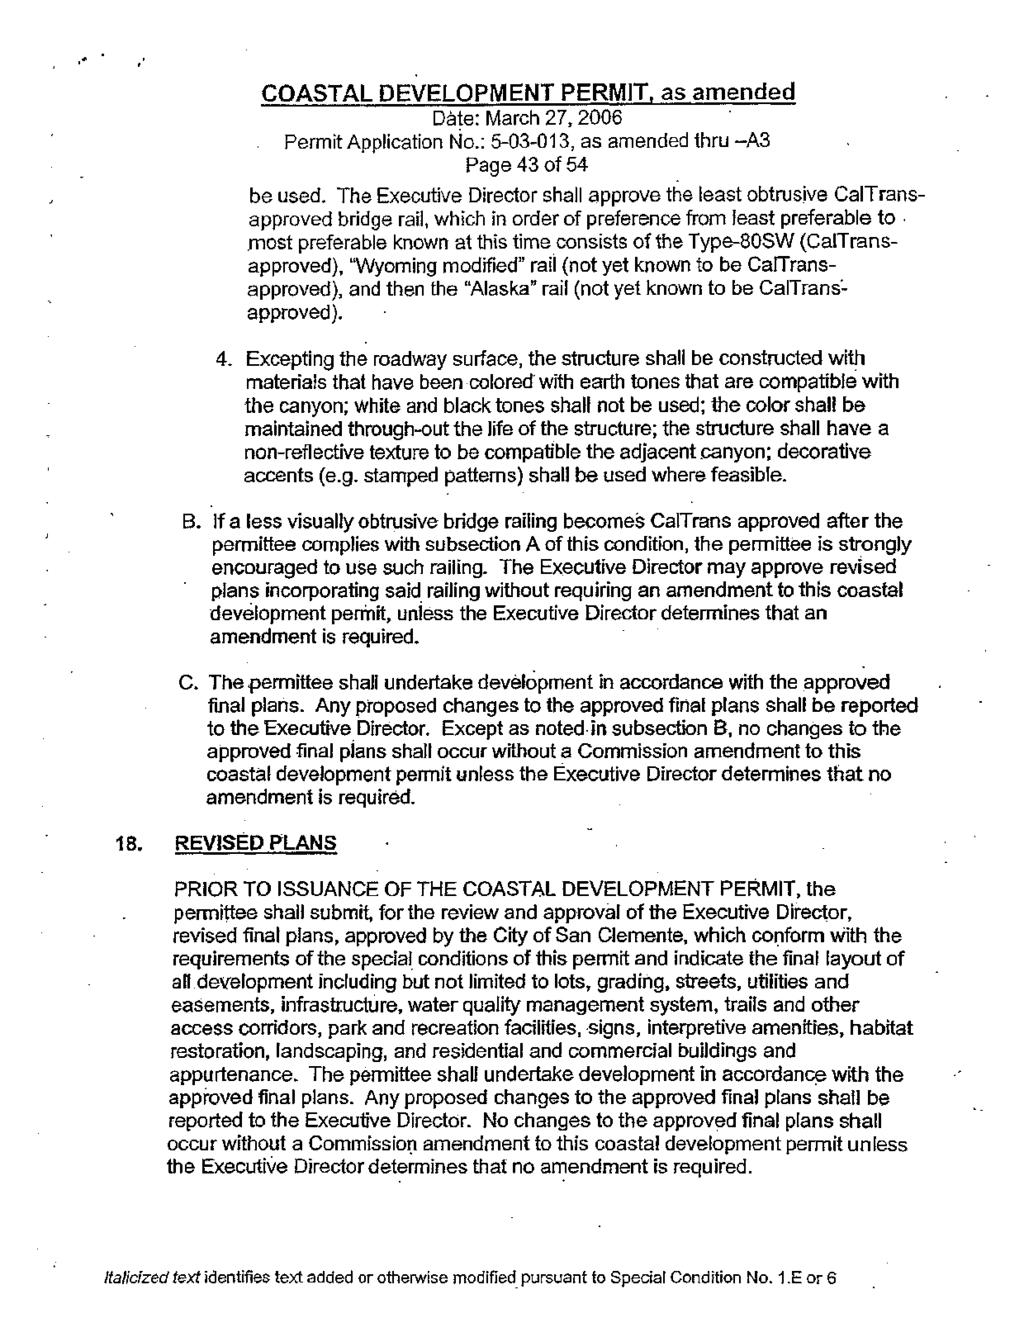 COASTAL DEVELOPMENT PERMIT, as amended Date: March 27, 2006 Permit Application No.: 5-03-013, as amended thru -A3 Page 43 of 54 be used.